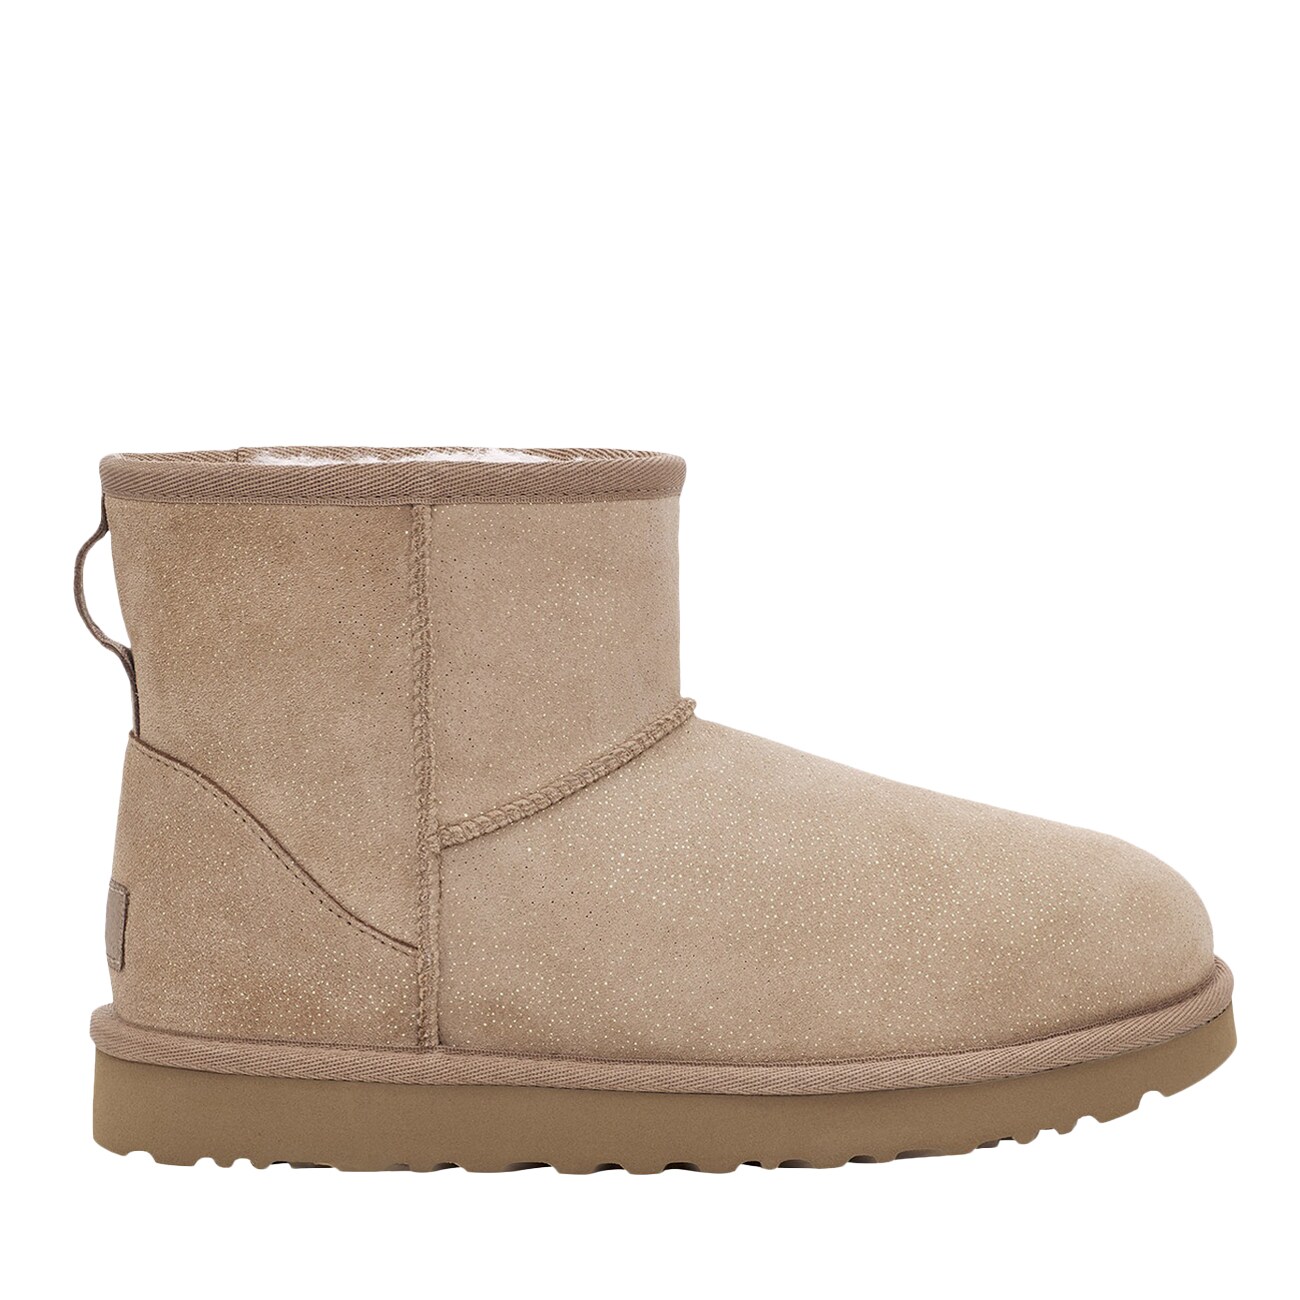 where can you buy uggs near me